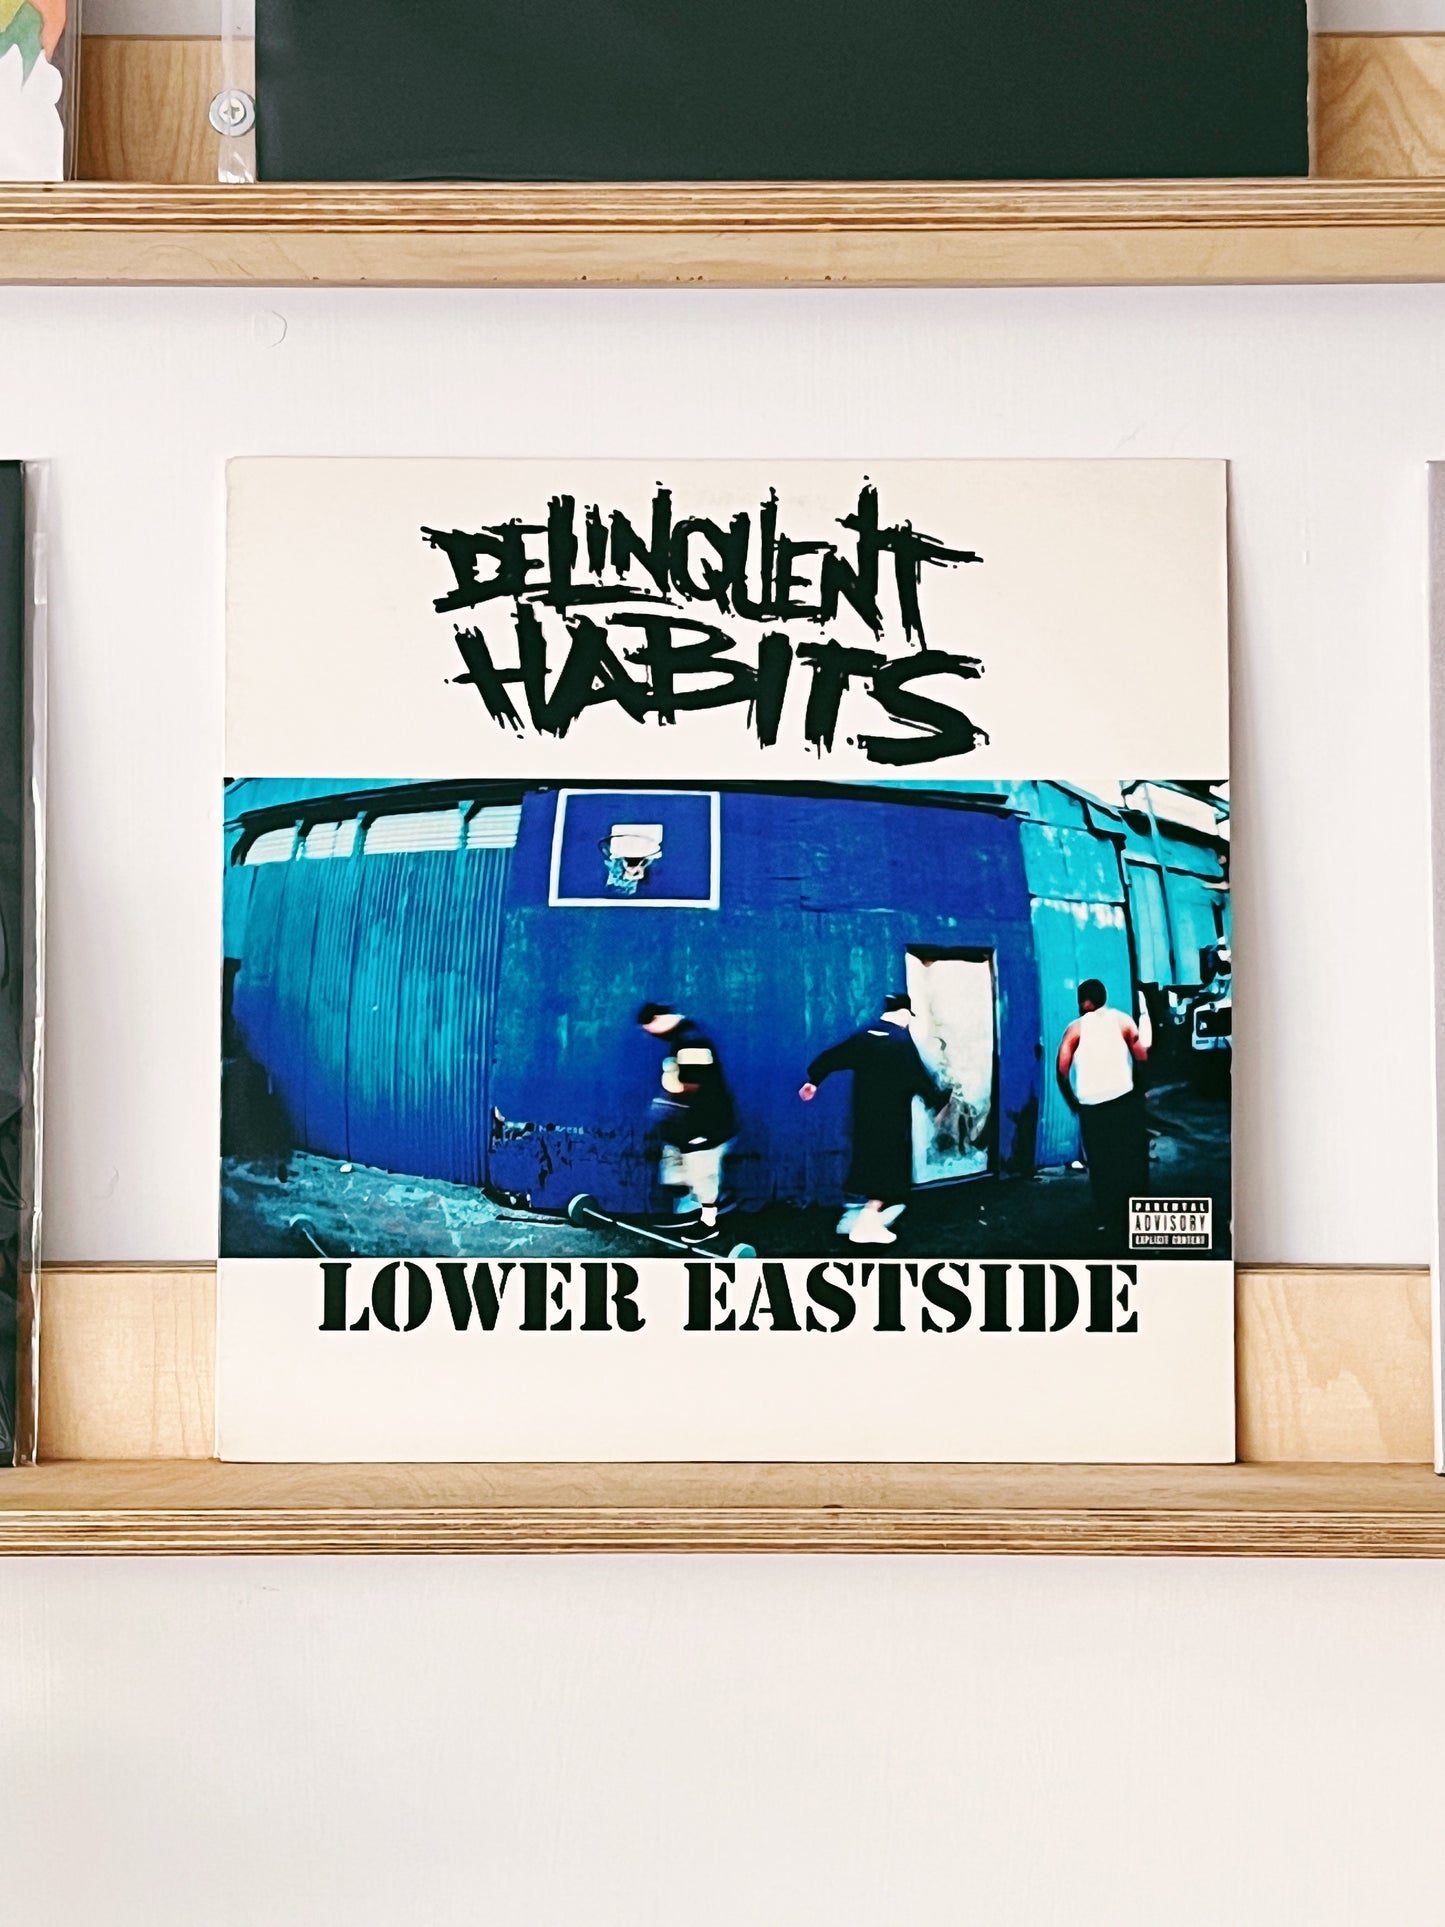 Delinquent Habits – Lower Eastside